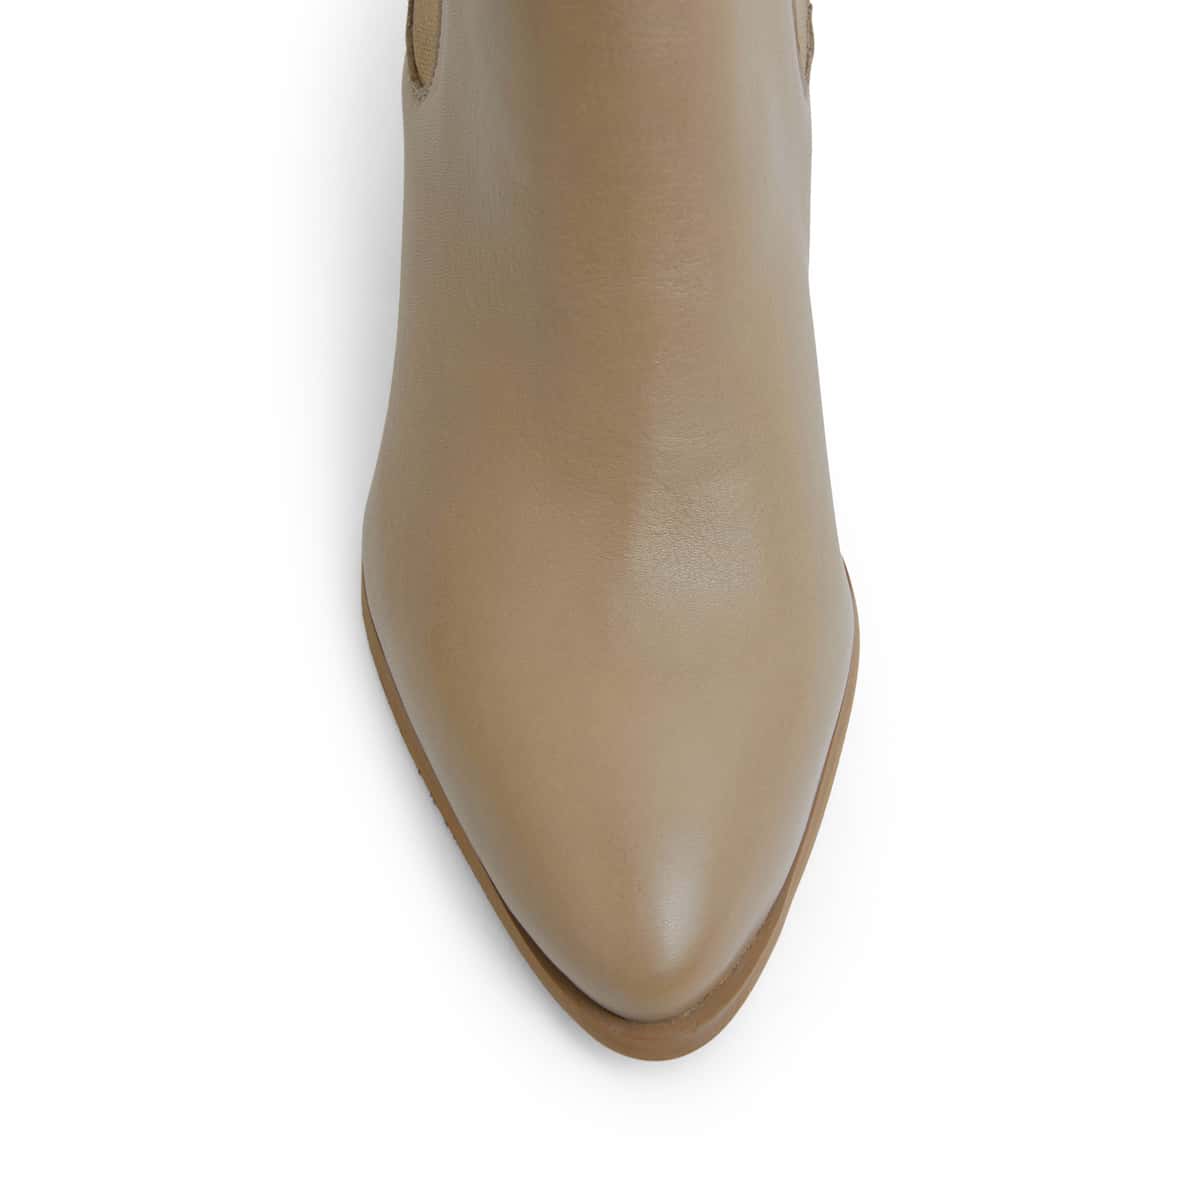 Neddy Boot in Taupe Leather